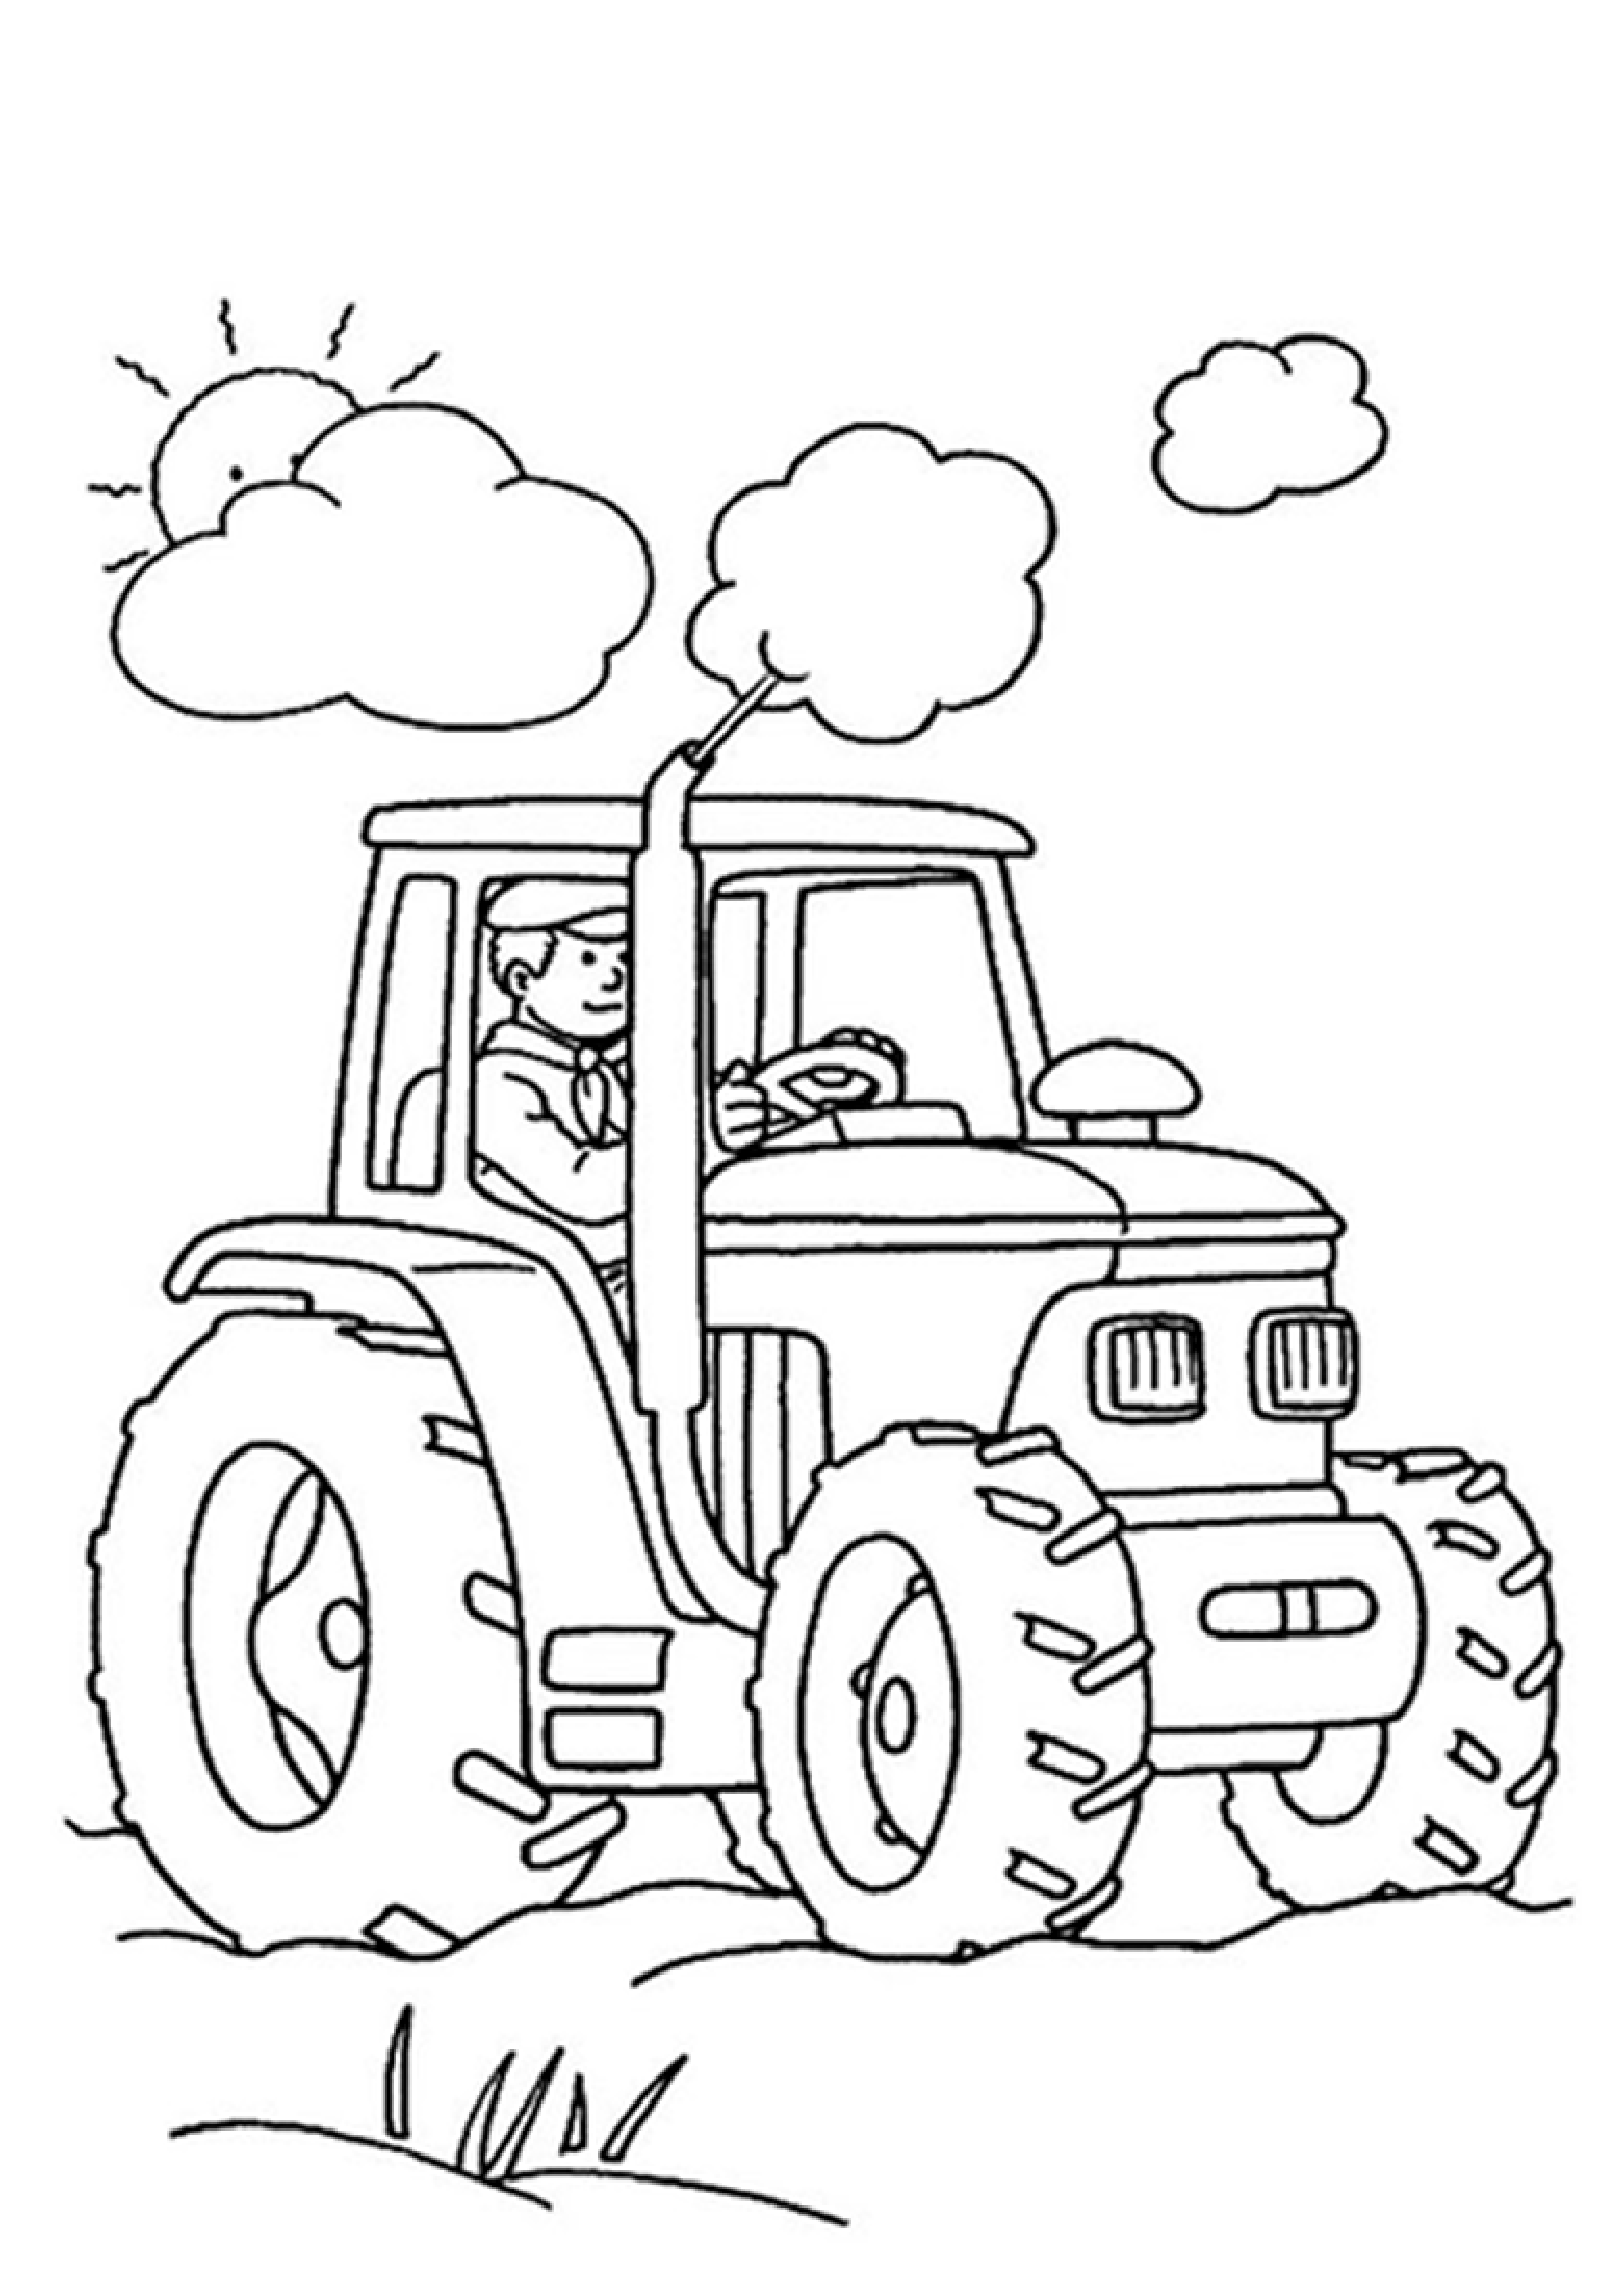 Farm free to color for children - Farm Kids Coloring Pages